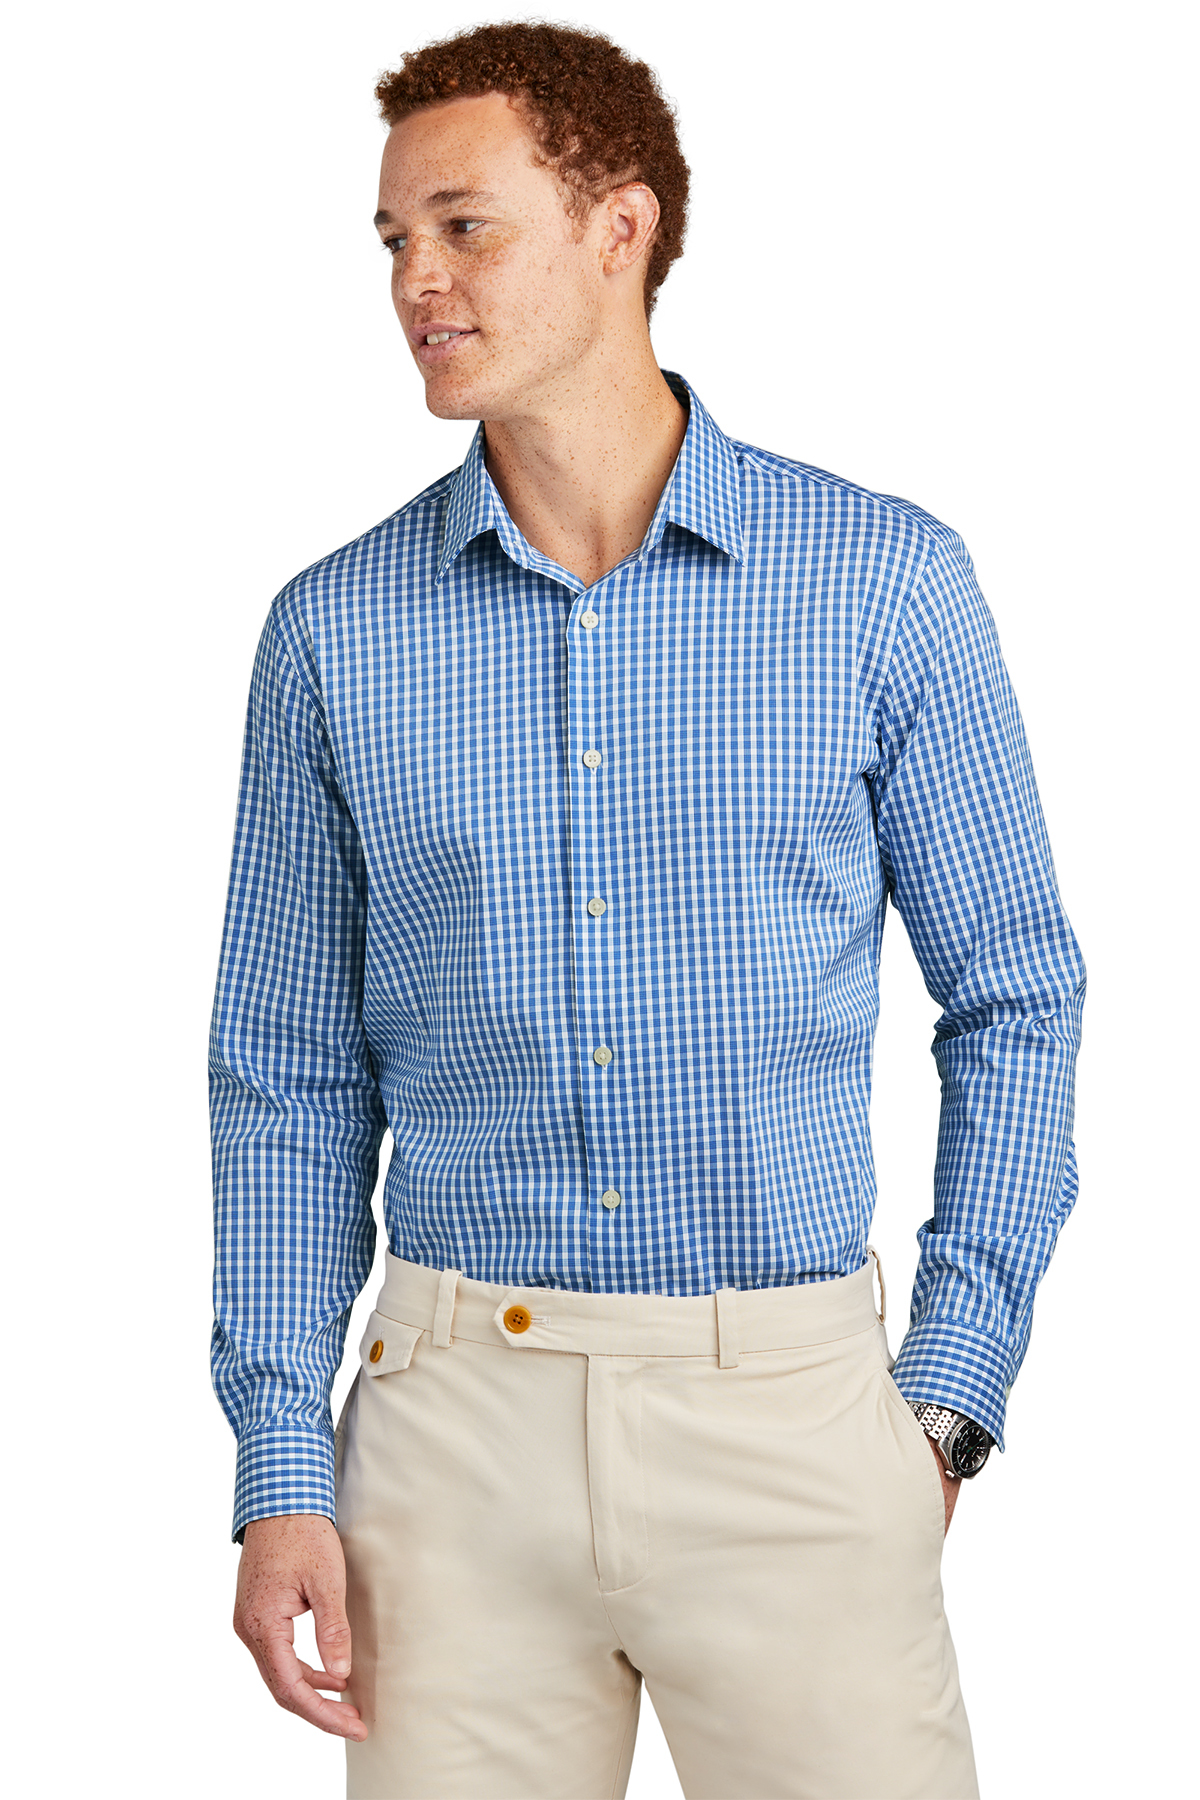 Brooks Brothers Tech Stretch Patterned Shirt | Product | SanMar